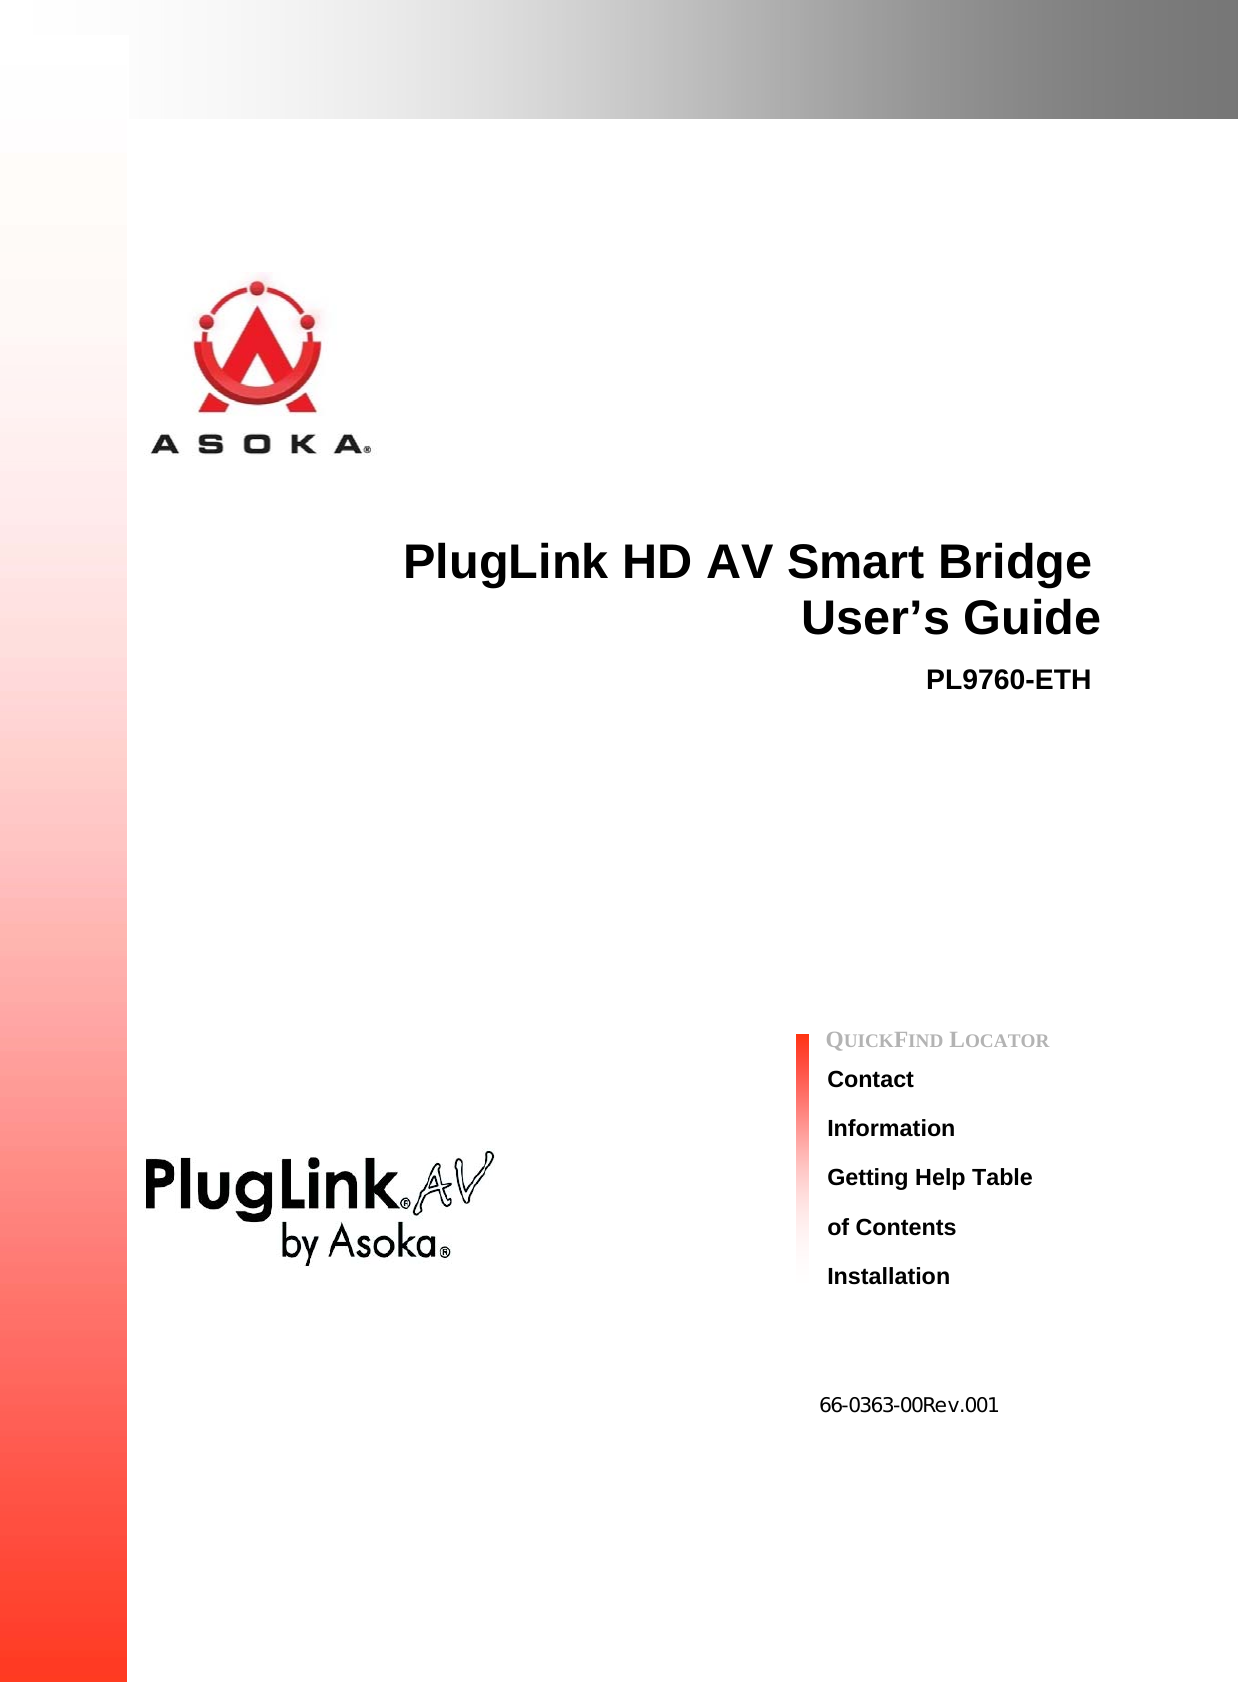                                                                                                                                                 66-0363-00Rev.001                        PlugLink HD AV Smart BridgeUser’s GuidePL9760-ETHContact Information Getting Help Table of Contents Installation  QUICKFIND LOCATOR 